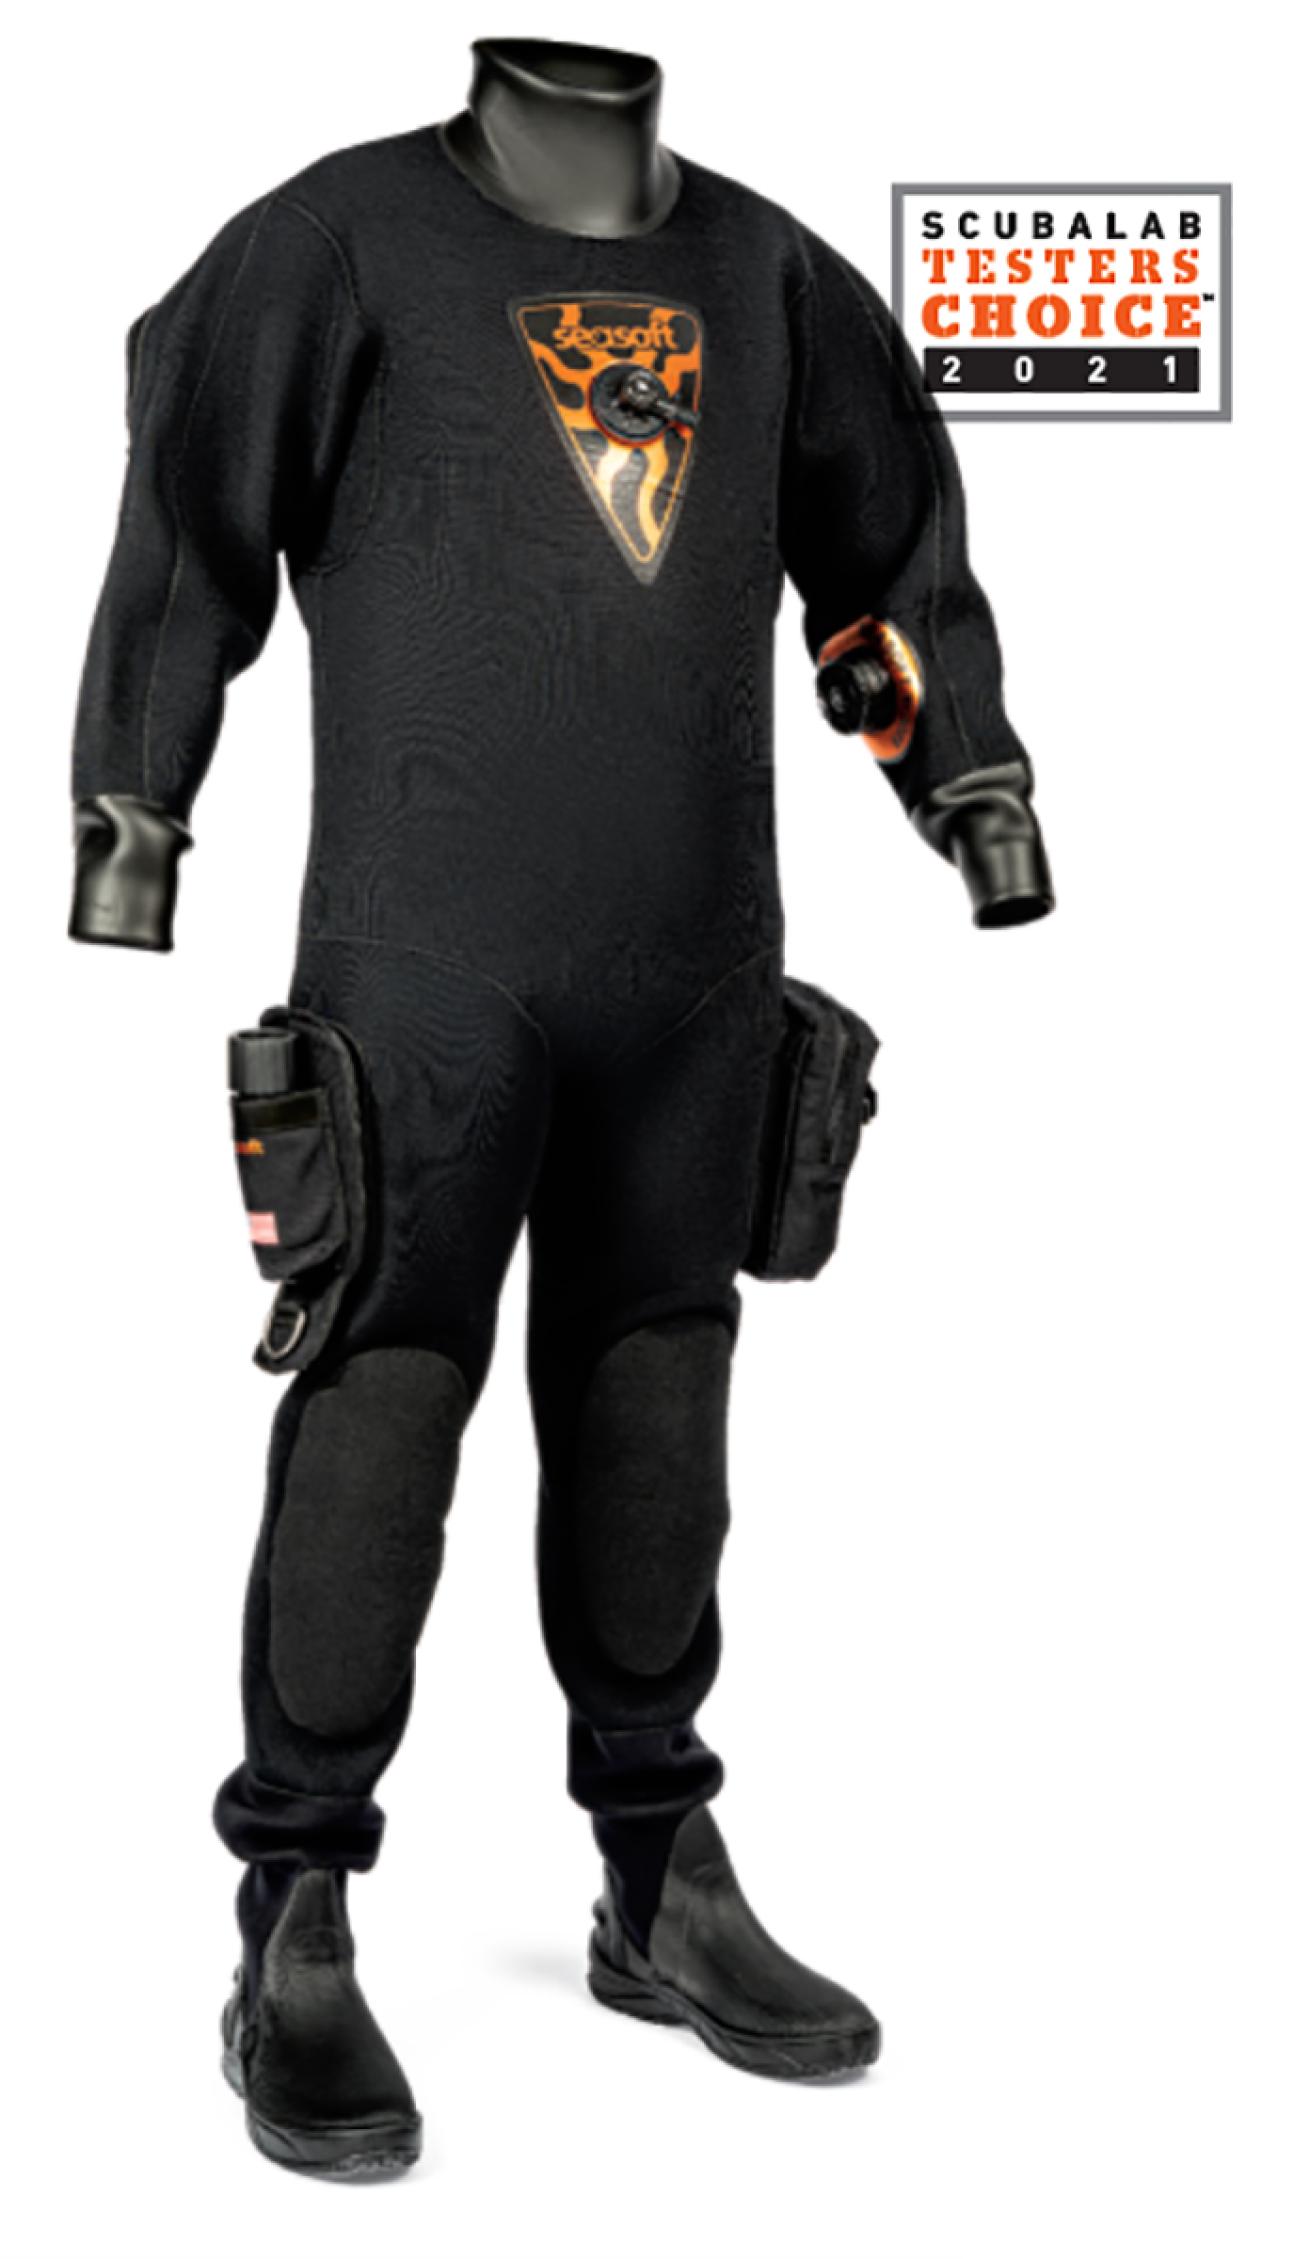 Seasoft TI 3000 drysuit with ScubaLab "Testers Choice 2021" stamp